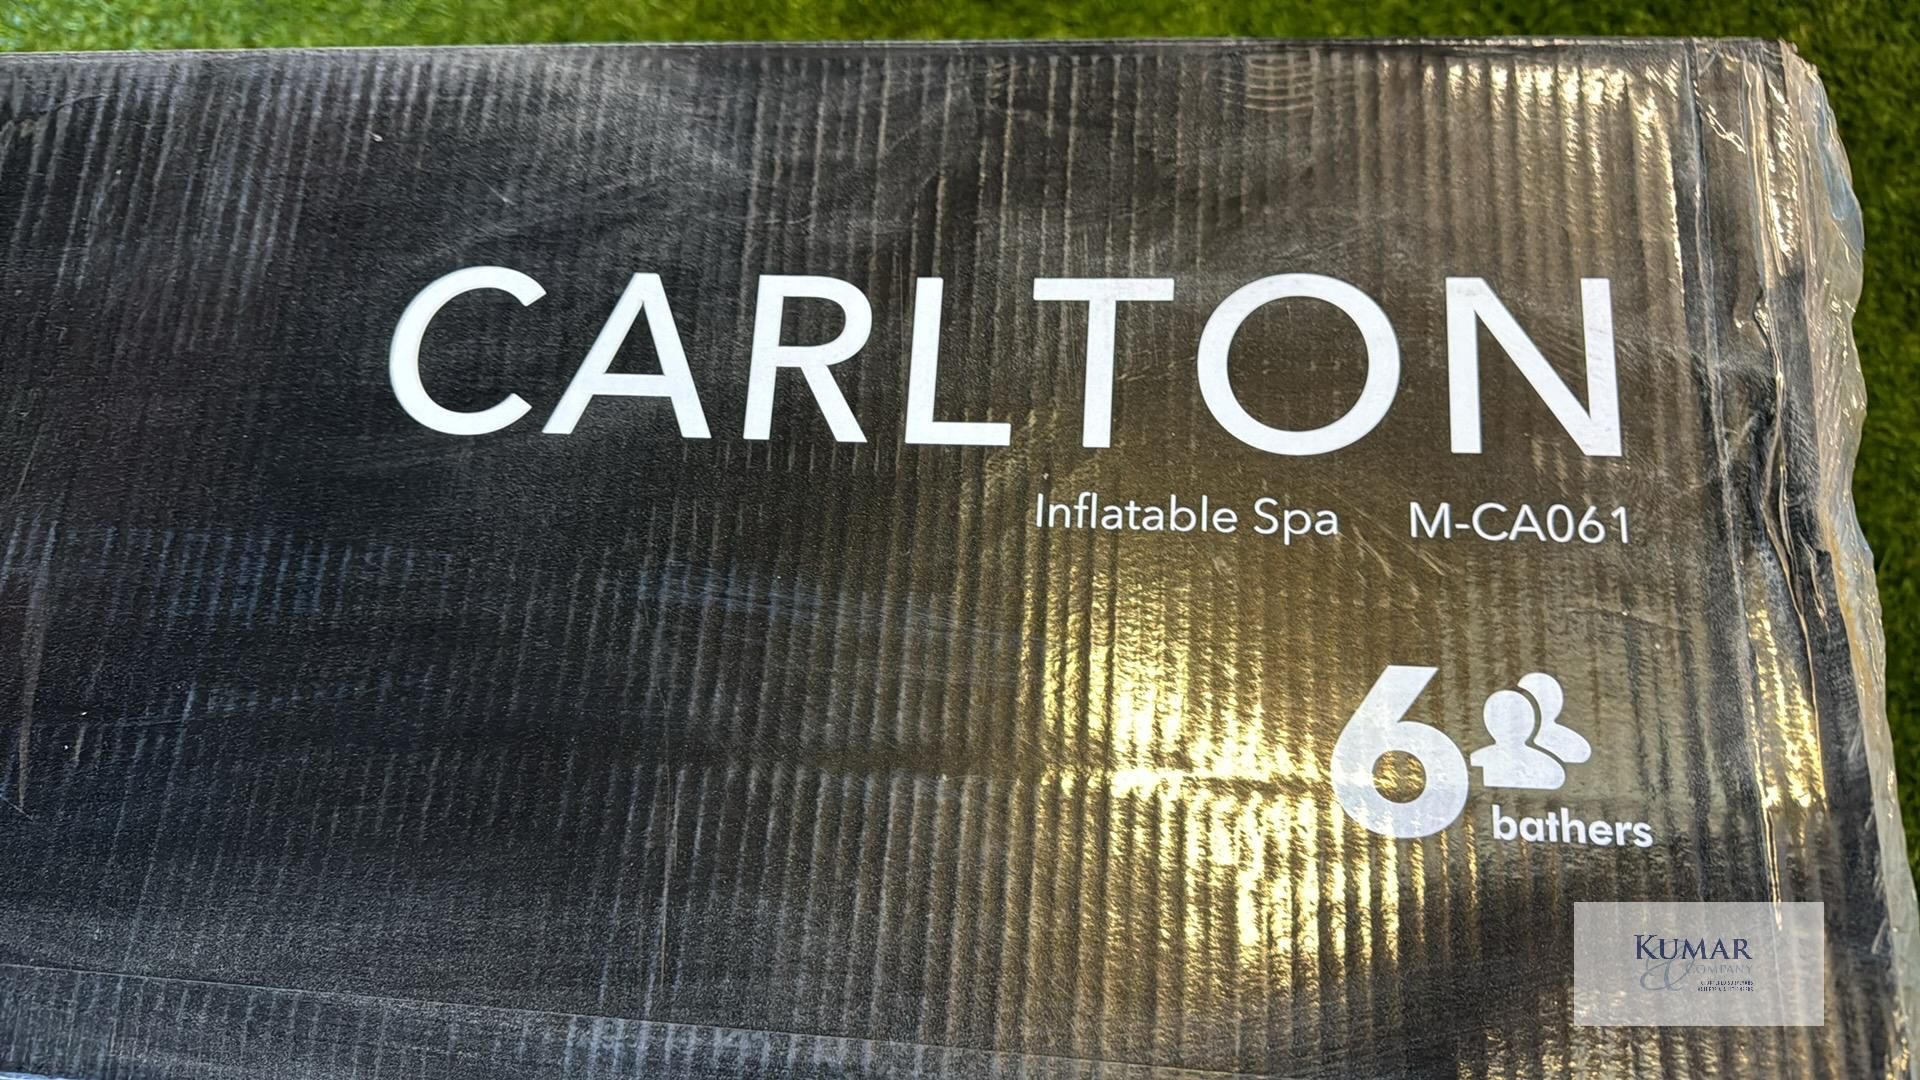 M Spa Carlton Muse Series M- CA061 6 Bather Inflatable Spa Display Model Never Been Used with Box - Image 4 of 13